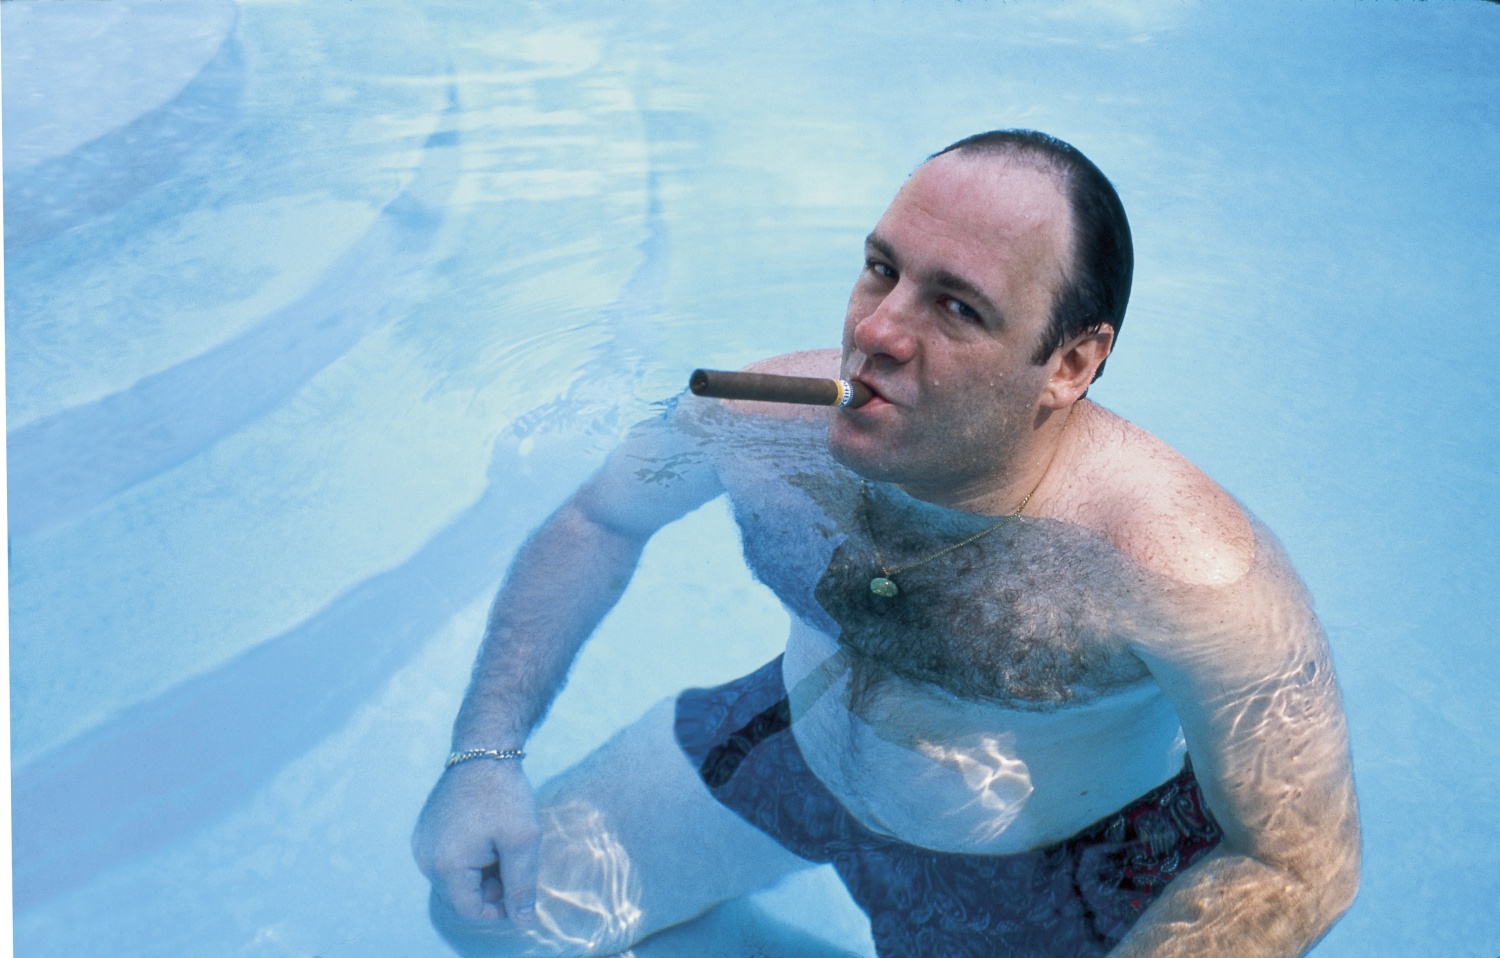 American actor James Gandolfini, as Tony Soprano, smokes a cigar while he stands in pool, in publicity still for the HBO cable TV series 'The Sopranos,' 1999.